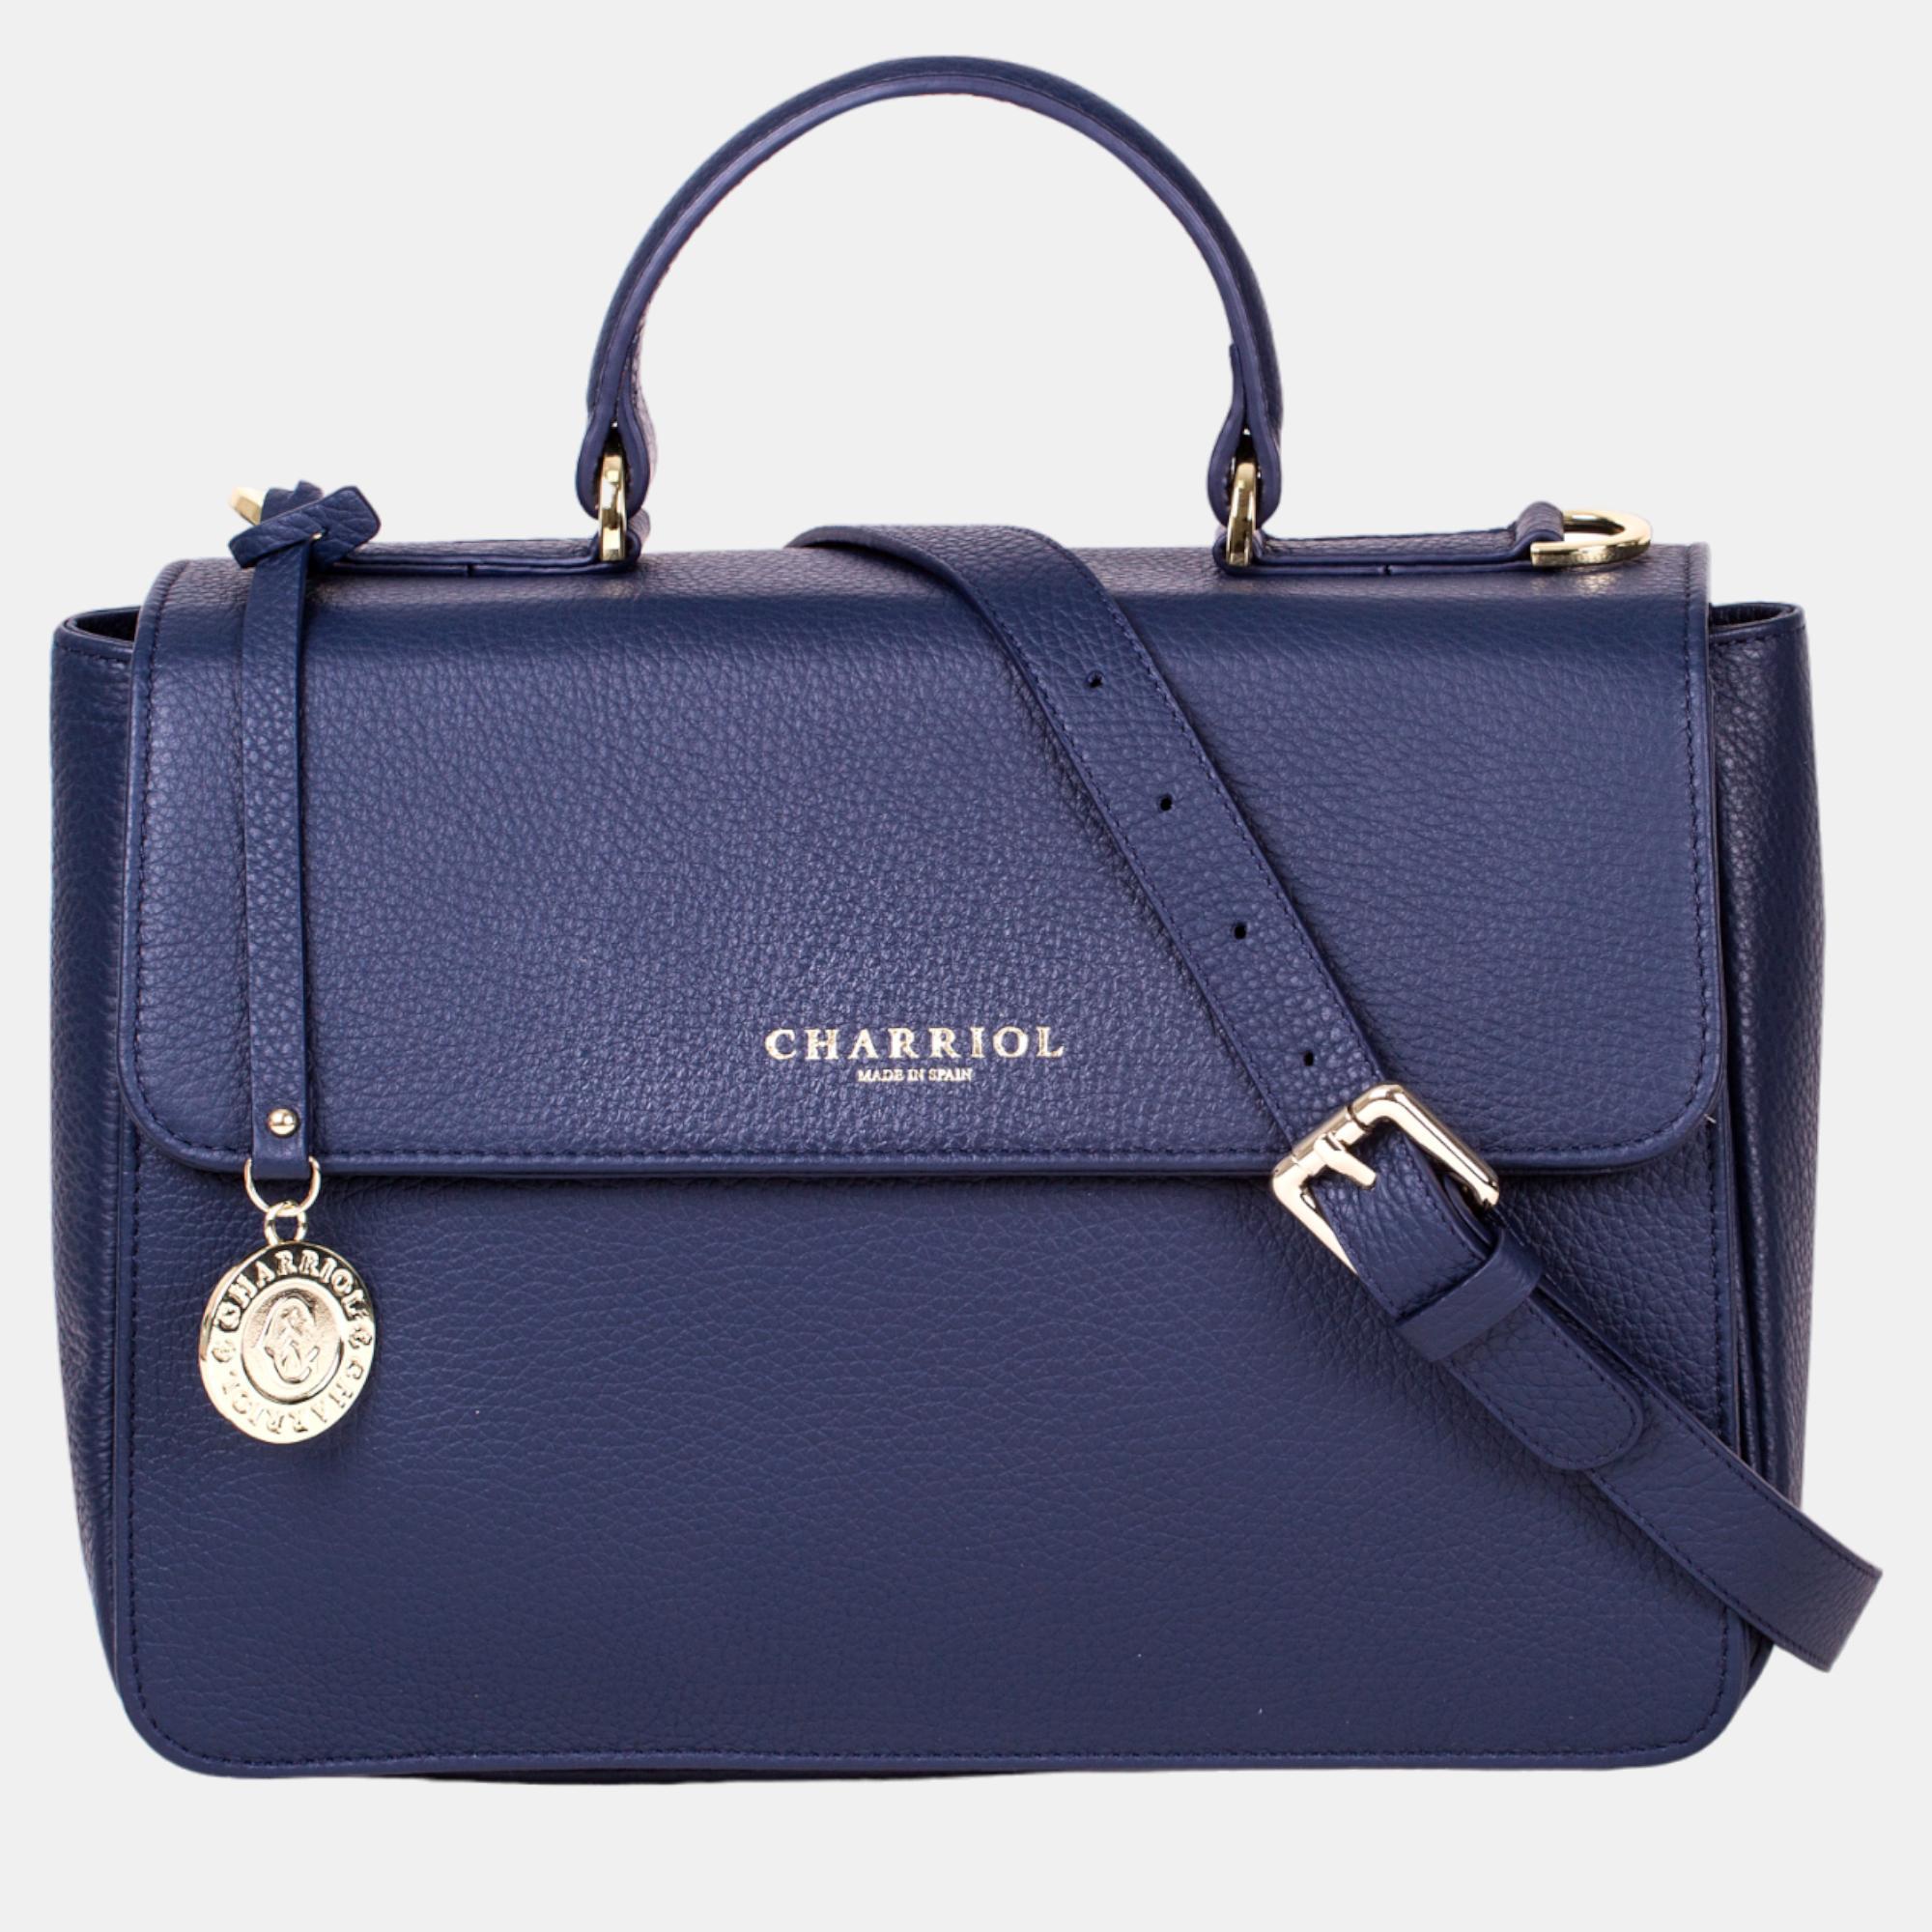 Pre-owned Charriol Leather Handbag In Navy Blue